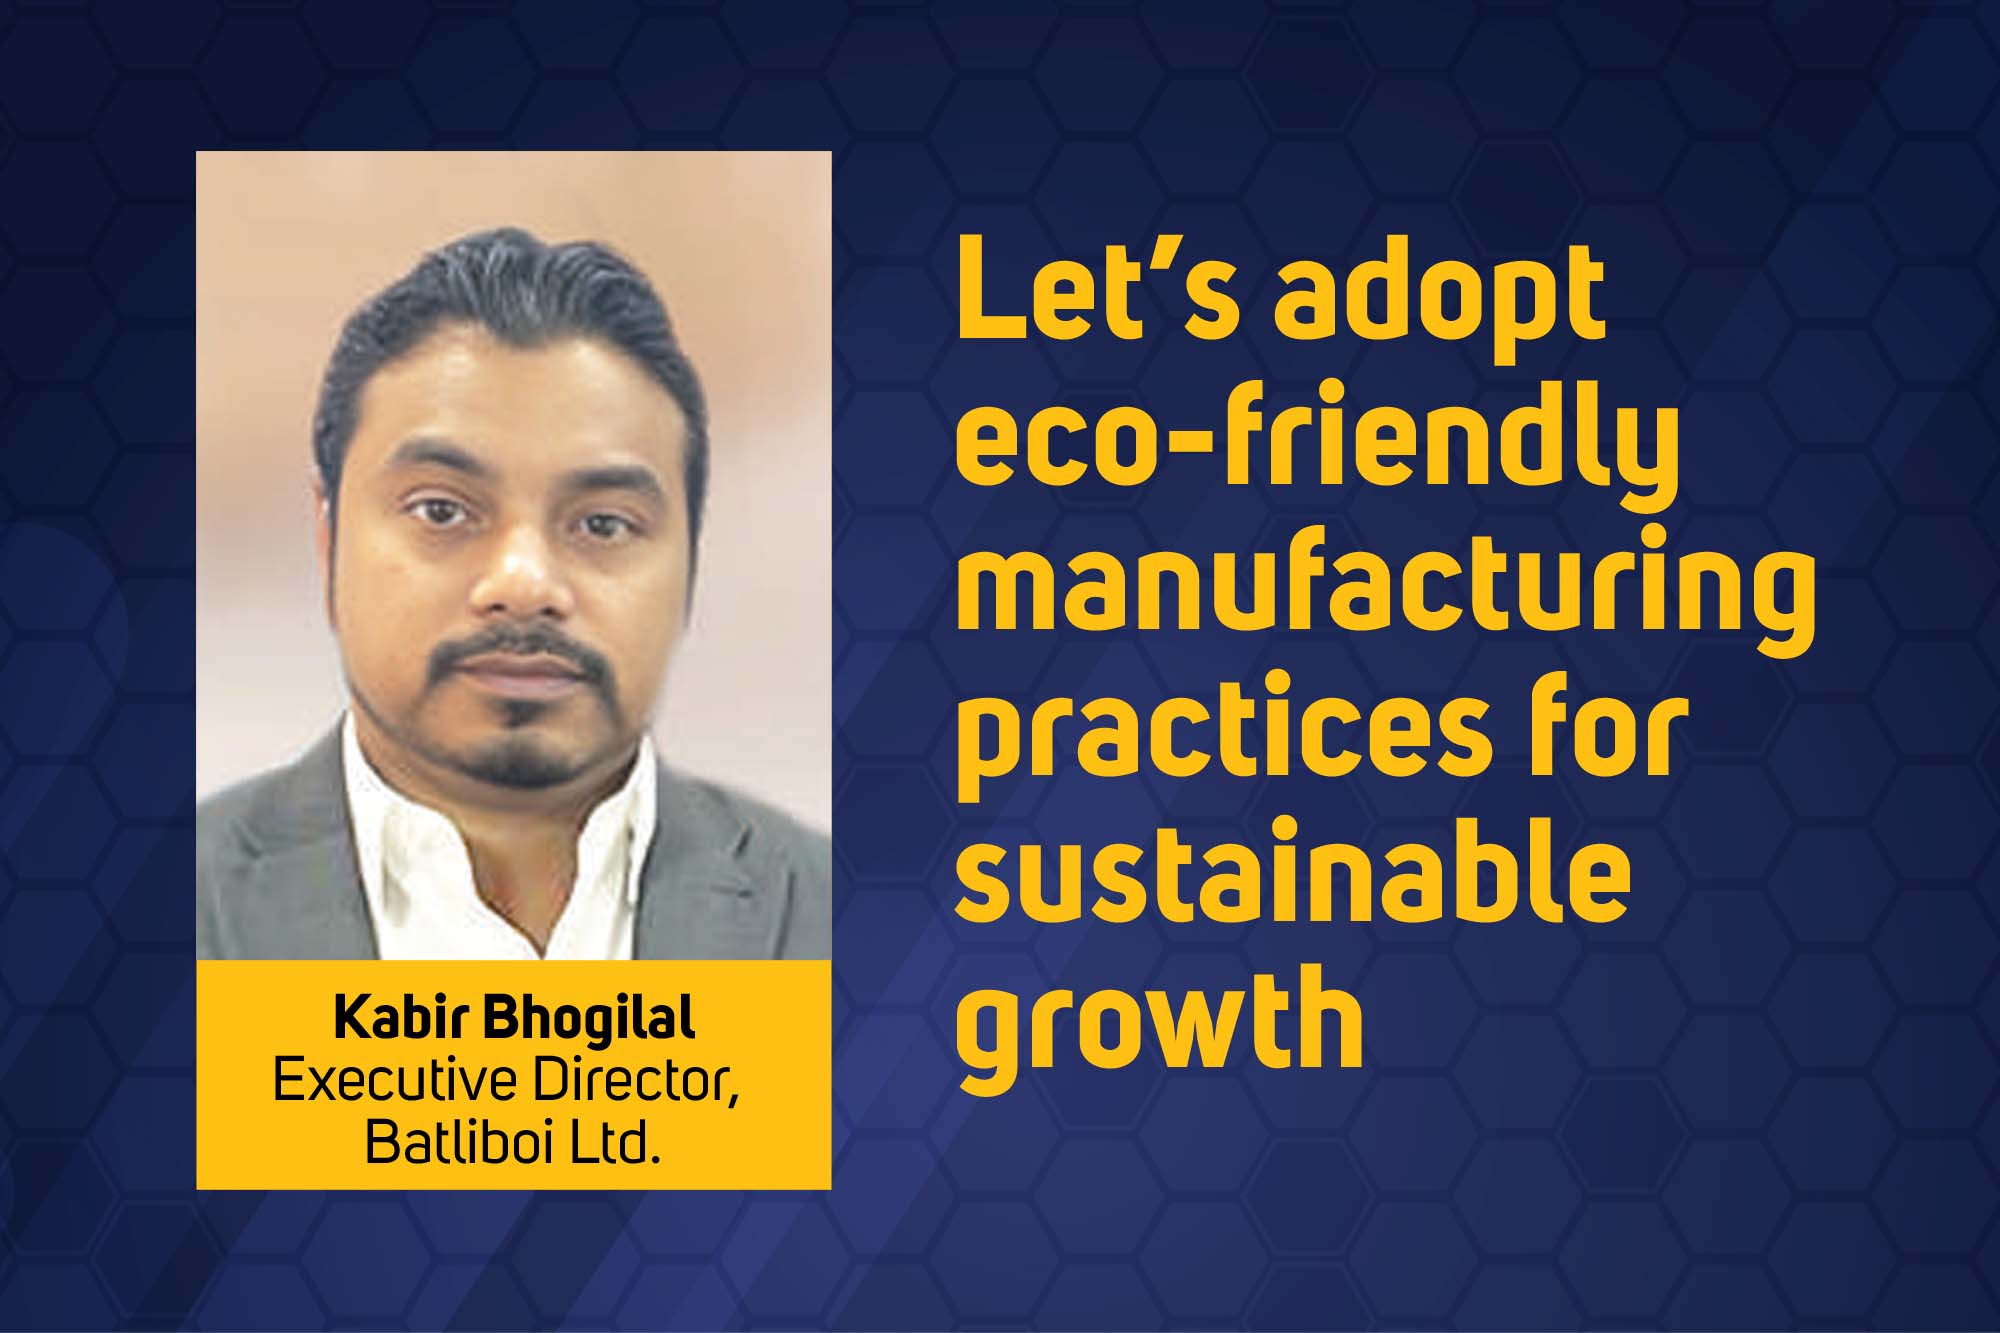 Let’s adopt eco-friendly manufacturing practices for sustainable growth